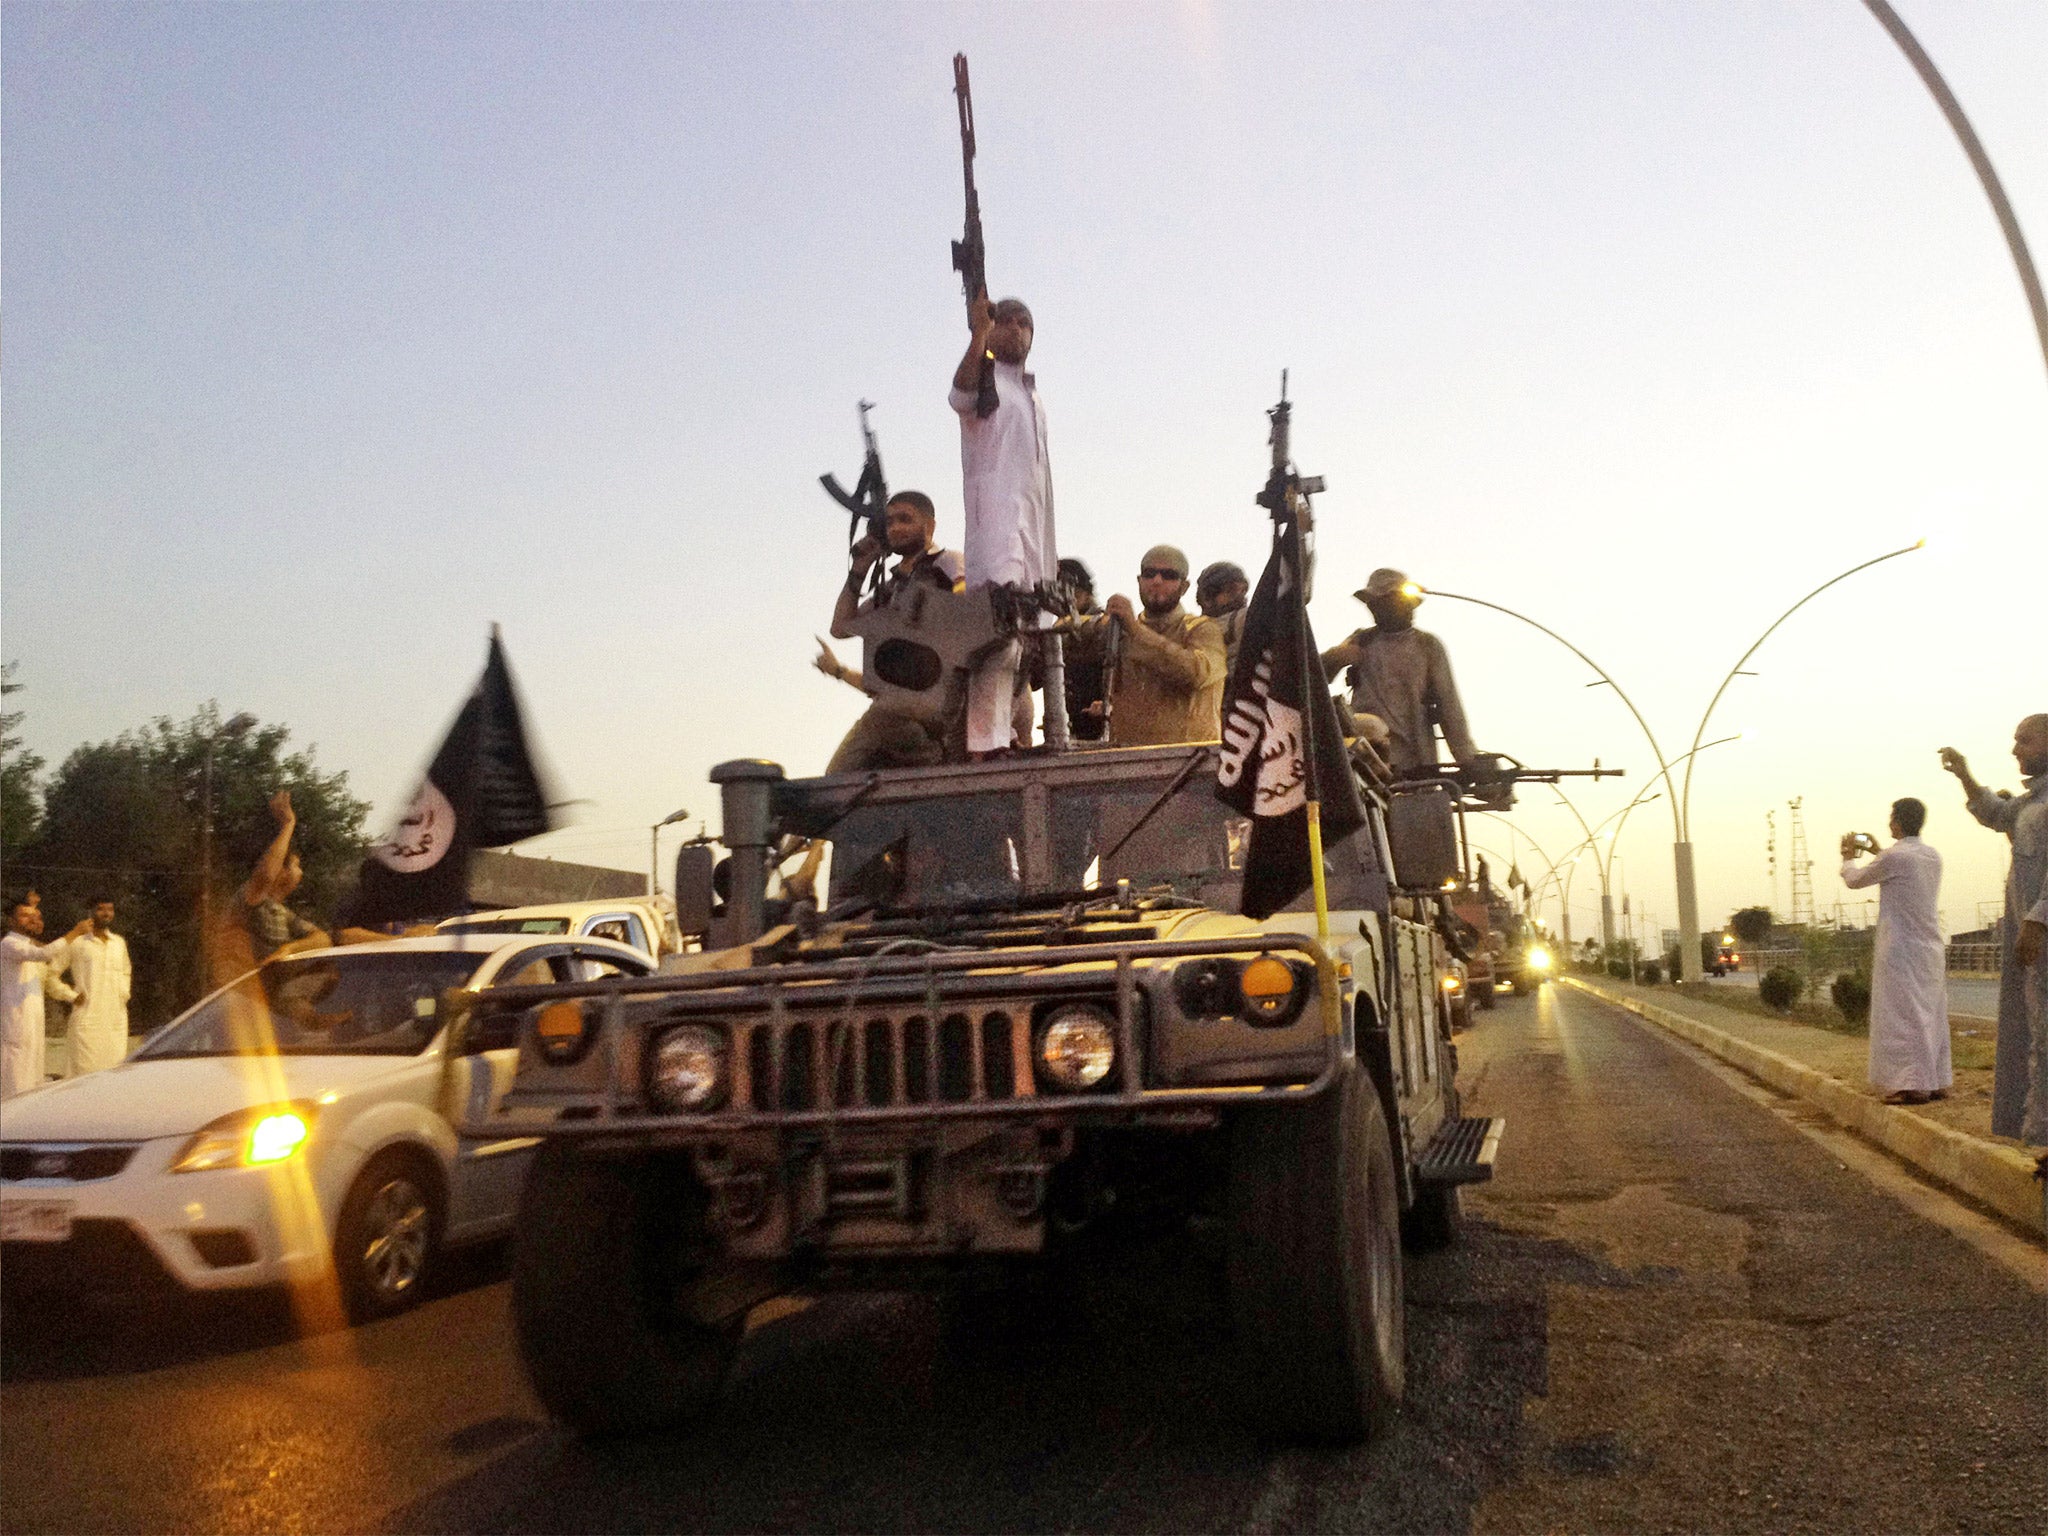 At least 700 Britons are believed to have flown to Syria or Iraq to join Isis forces